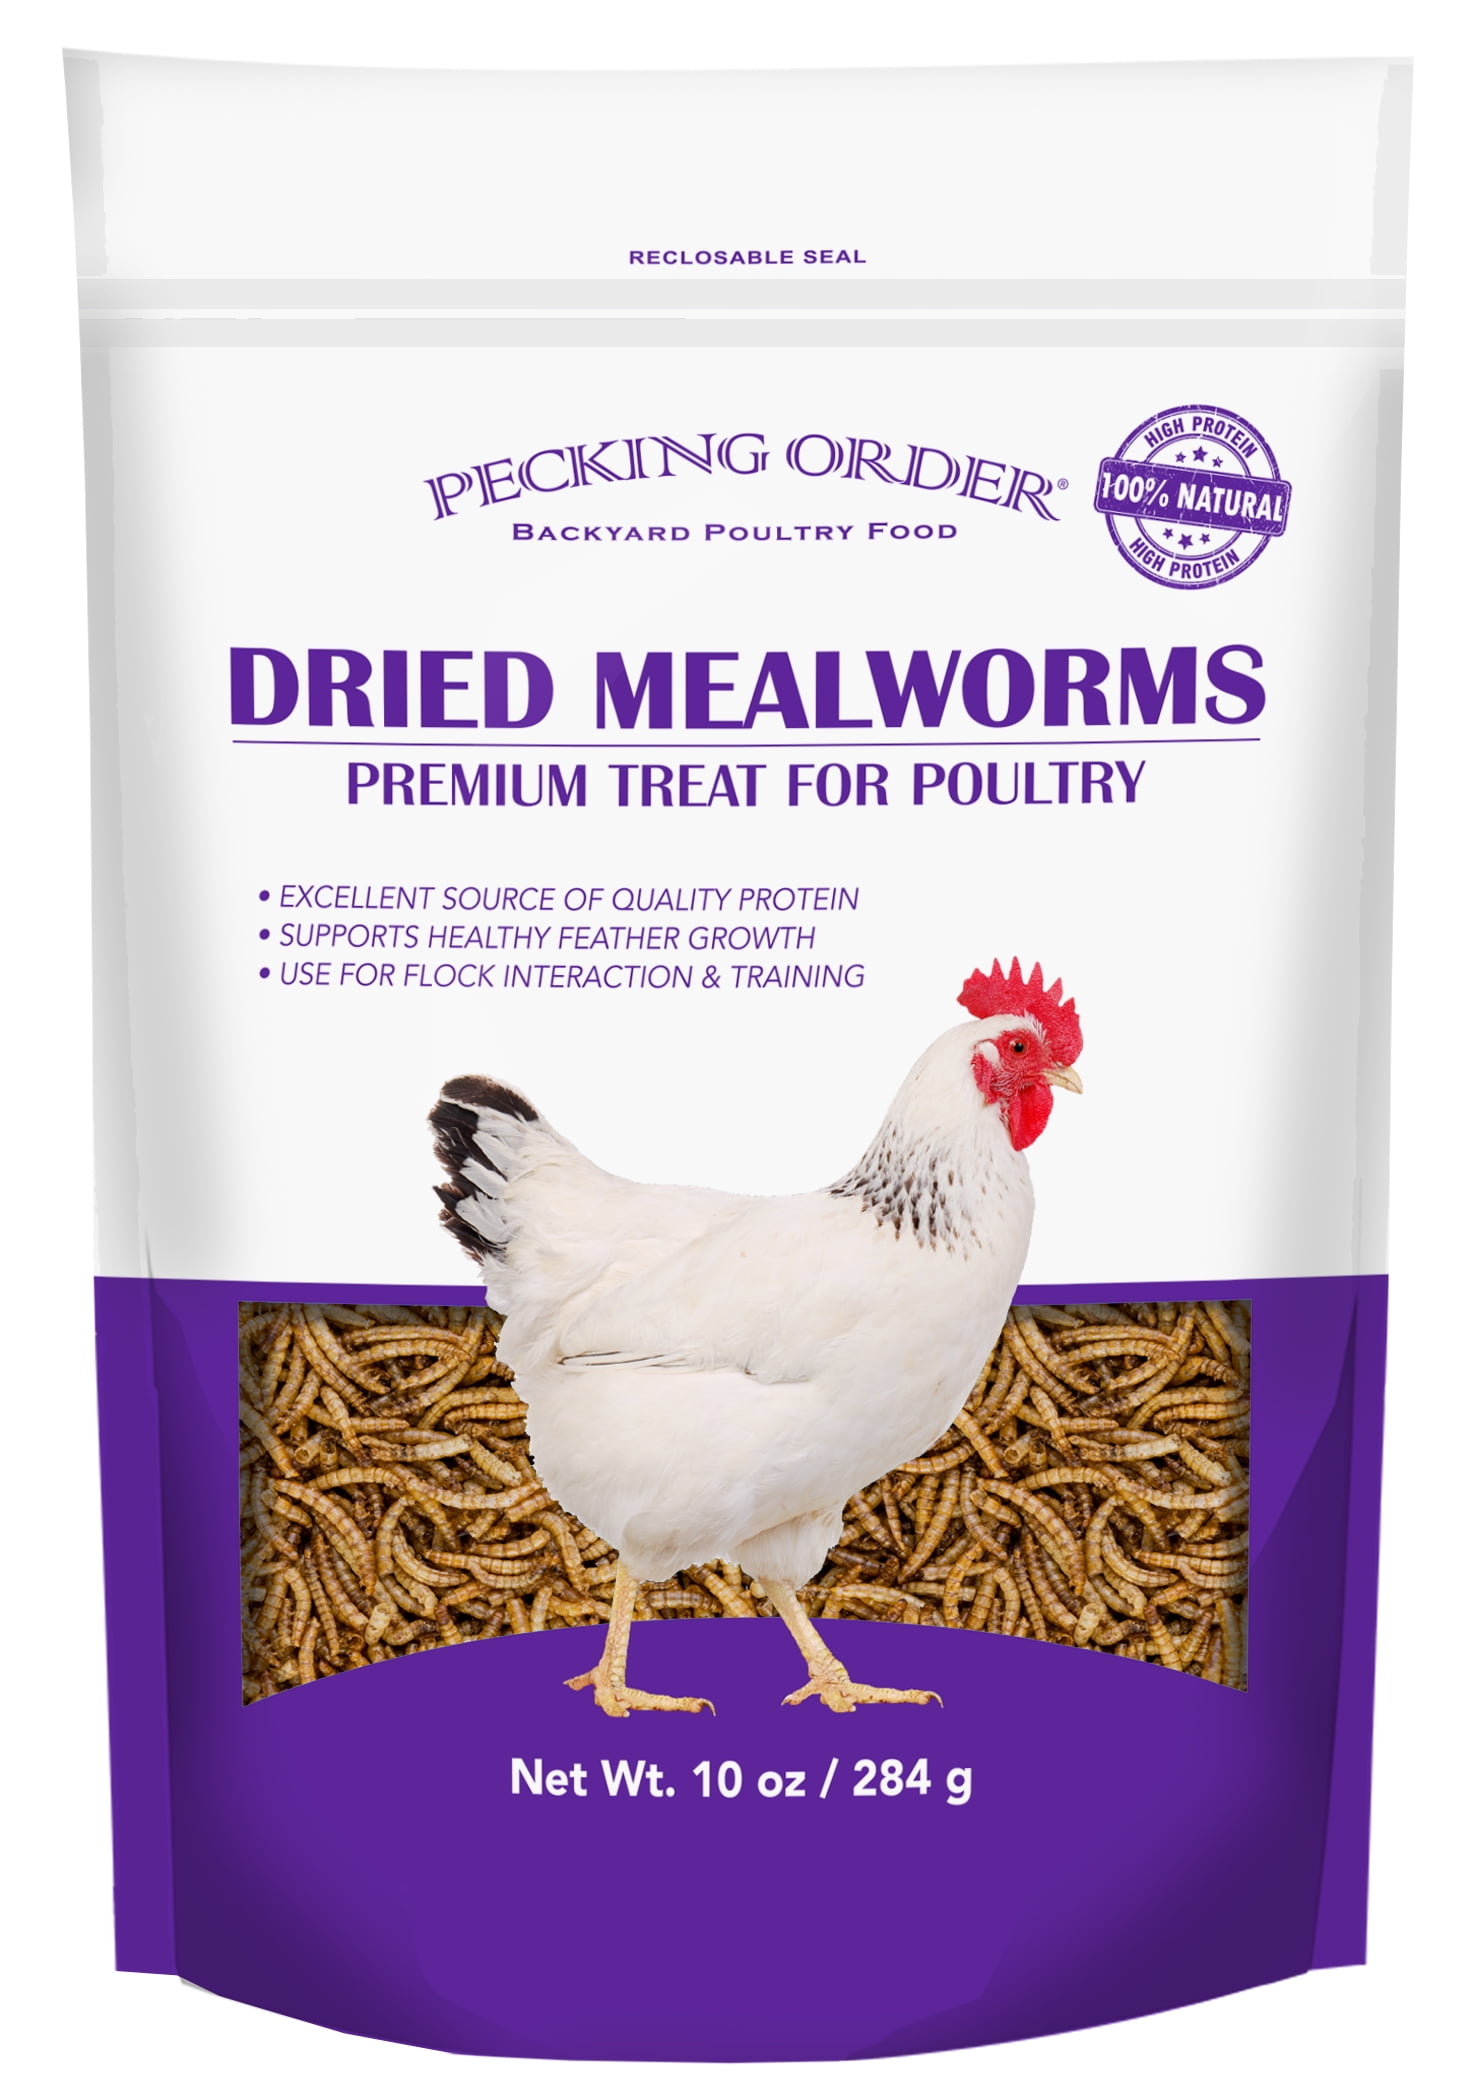 Red River Commodities Pecking Order Dried Mealworms Backyard Chicken Feed & Treat, 10 oz.